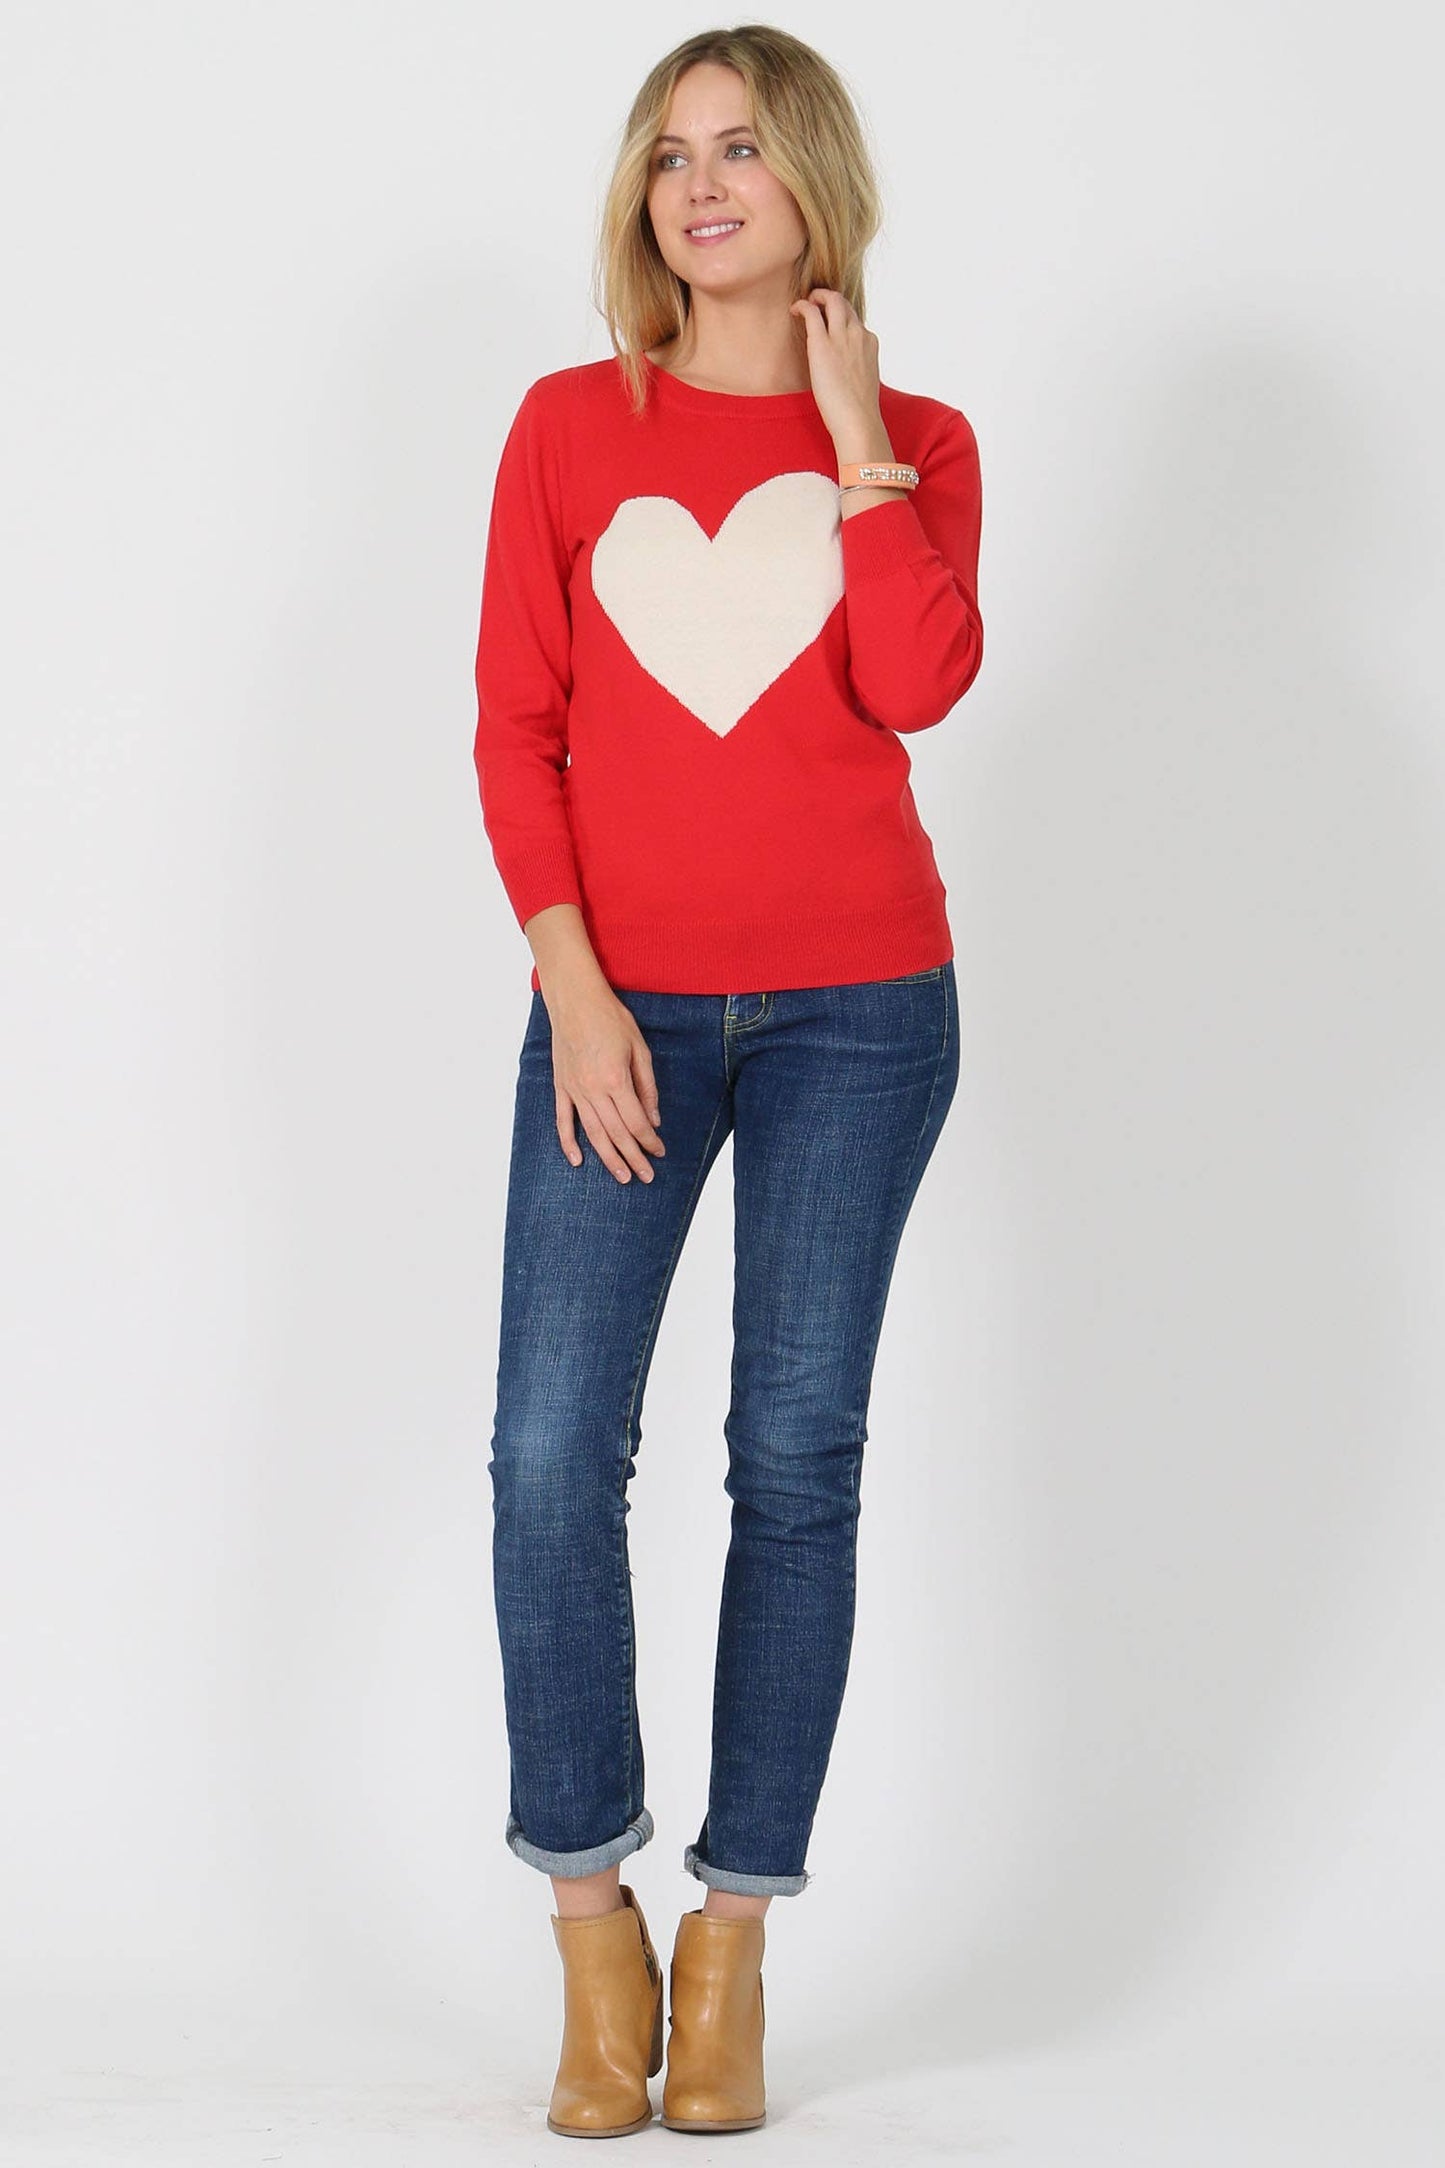 ,.SC23031 Sweet cute heart valentine pullover sweater: TOMATO/OATMEAL-23031 / S